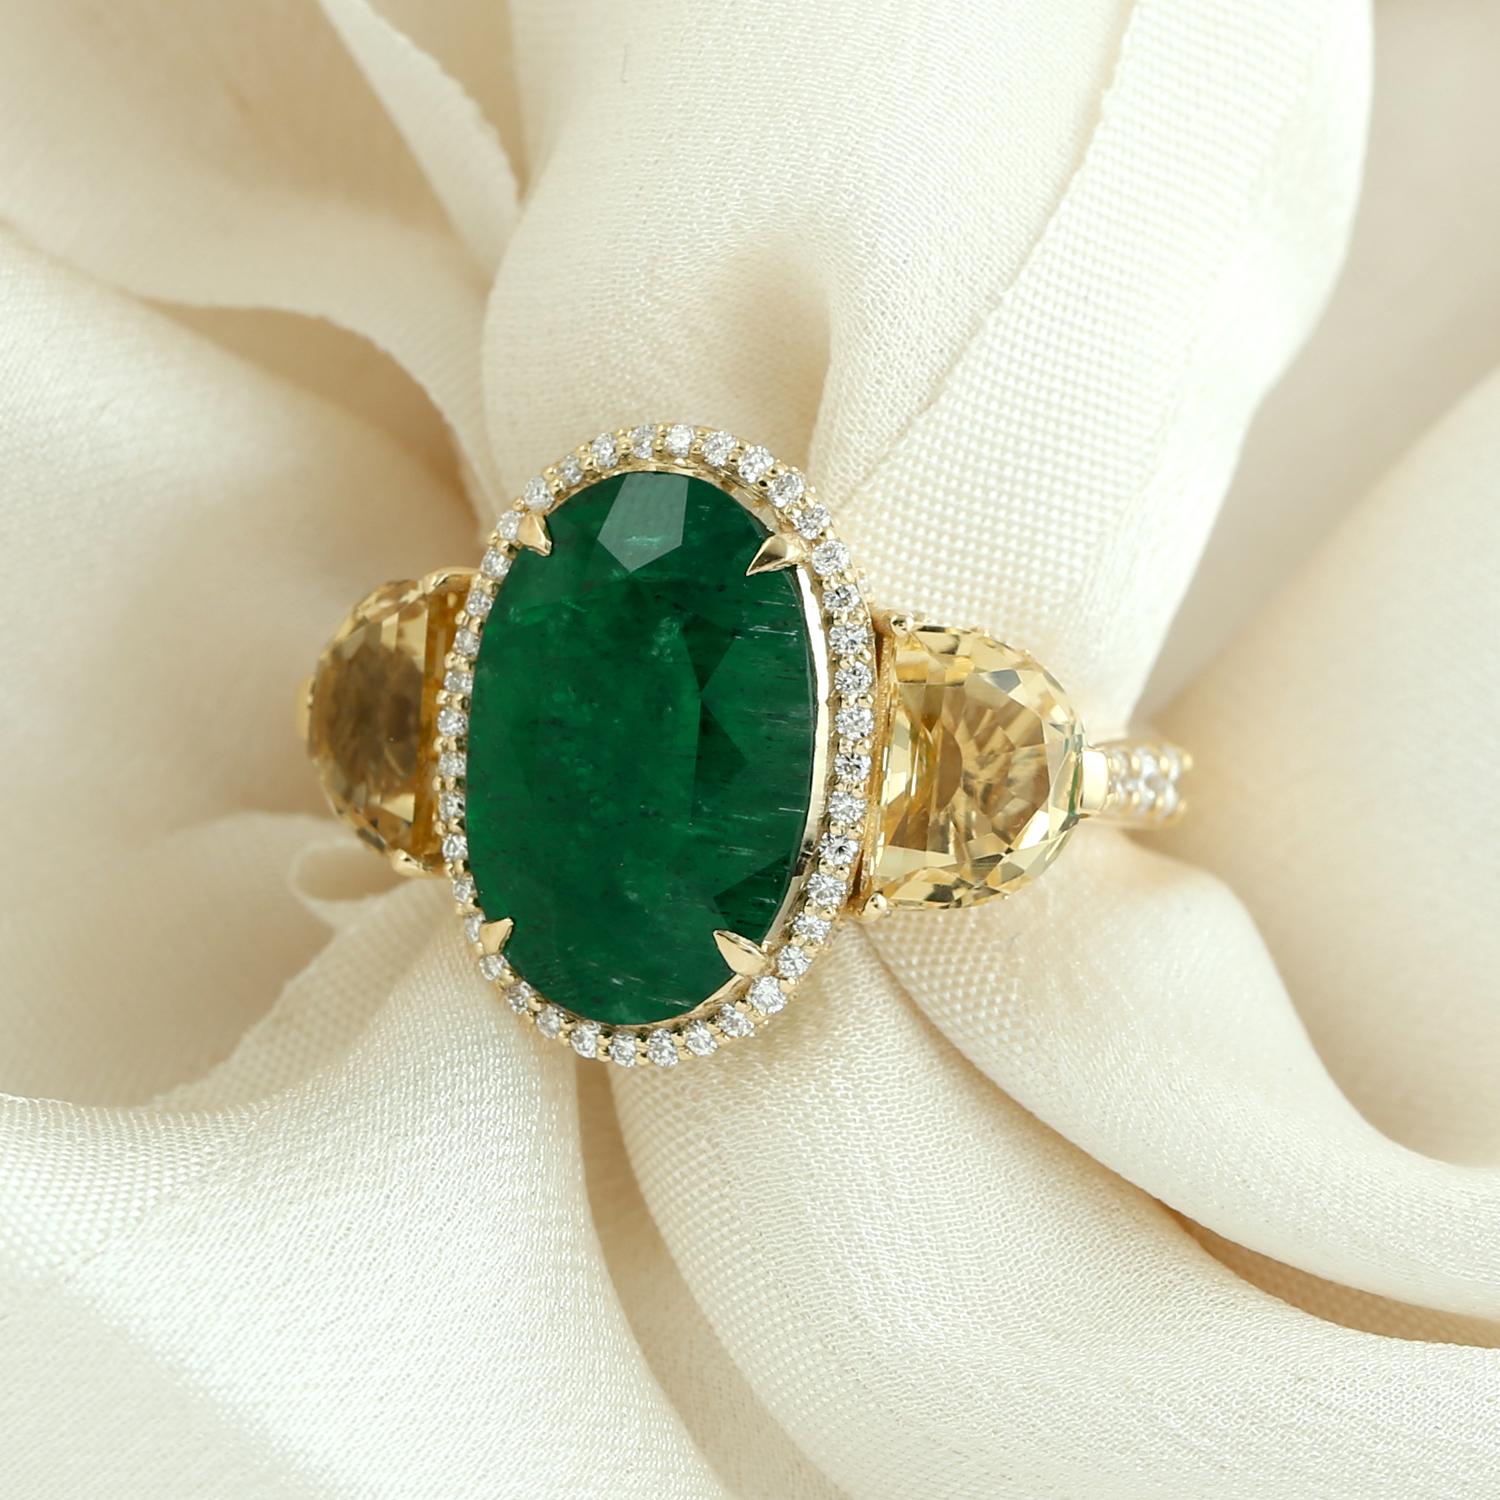 Mixed Cut Oval Shaped Zambian Emerald Cocktail Ring With Citrine For Sale